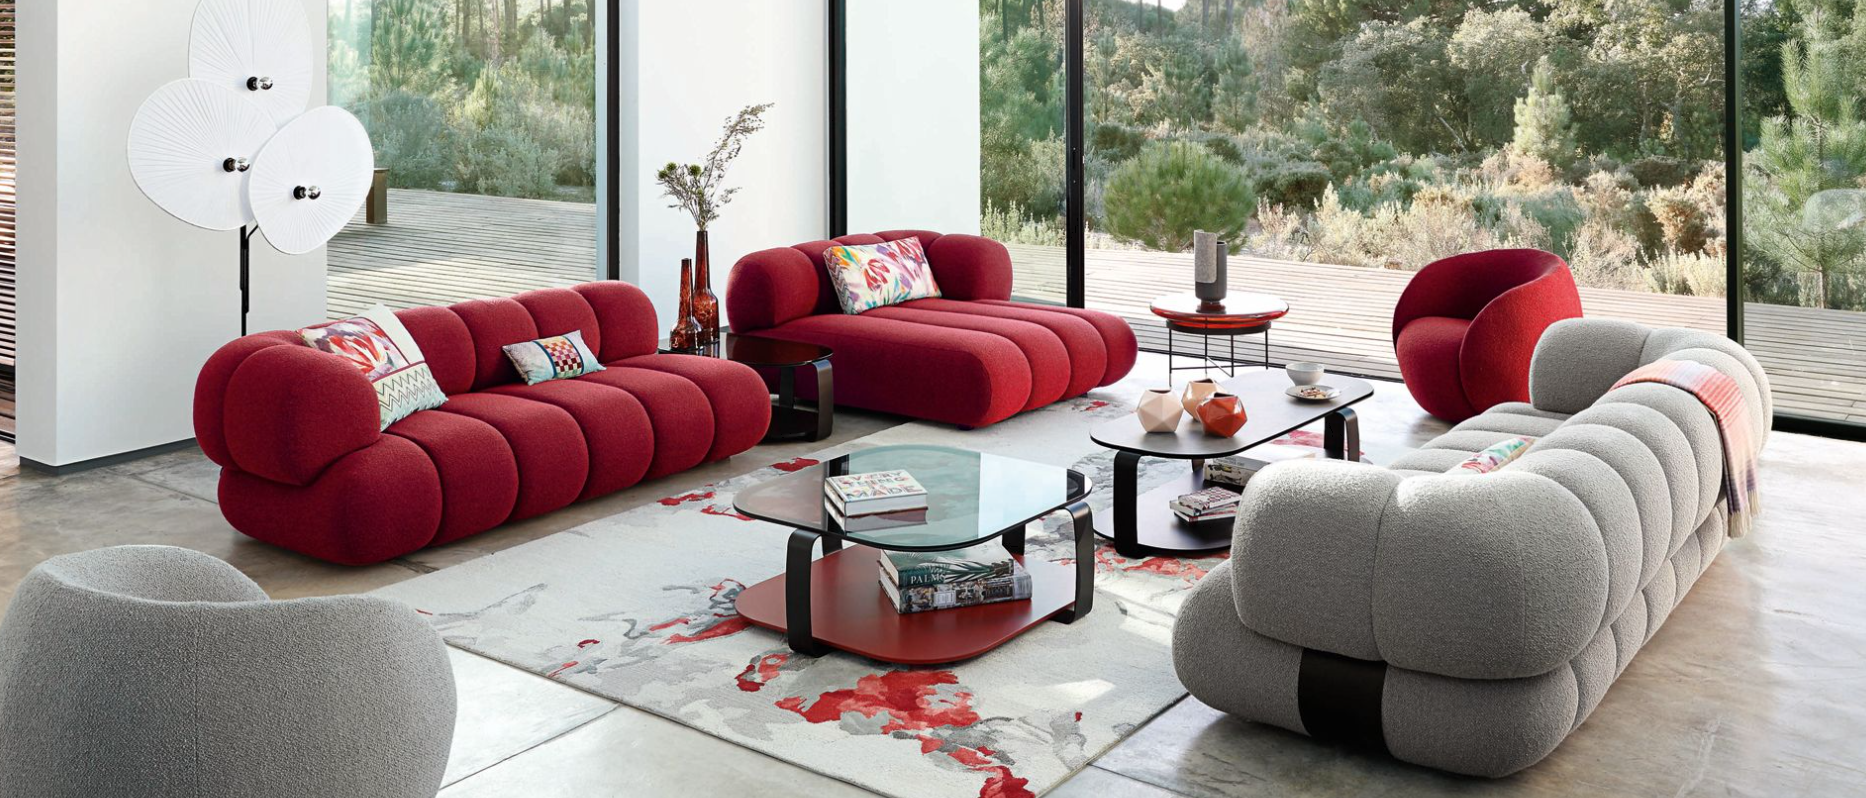 Image of a stylish living room featuring furniture from Roche Bobois